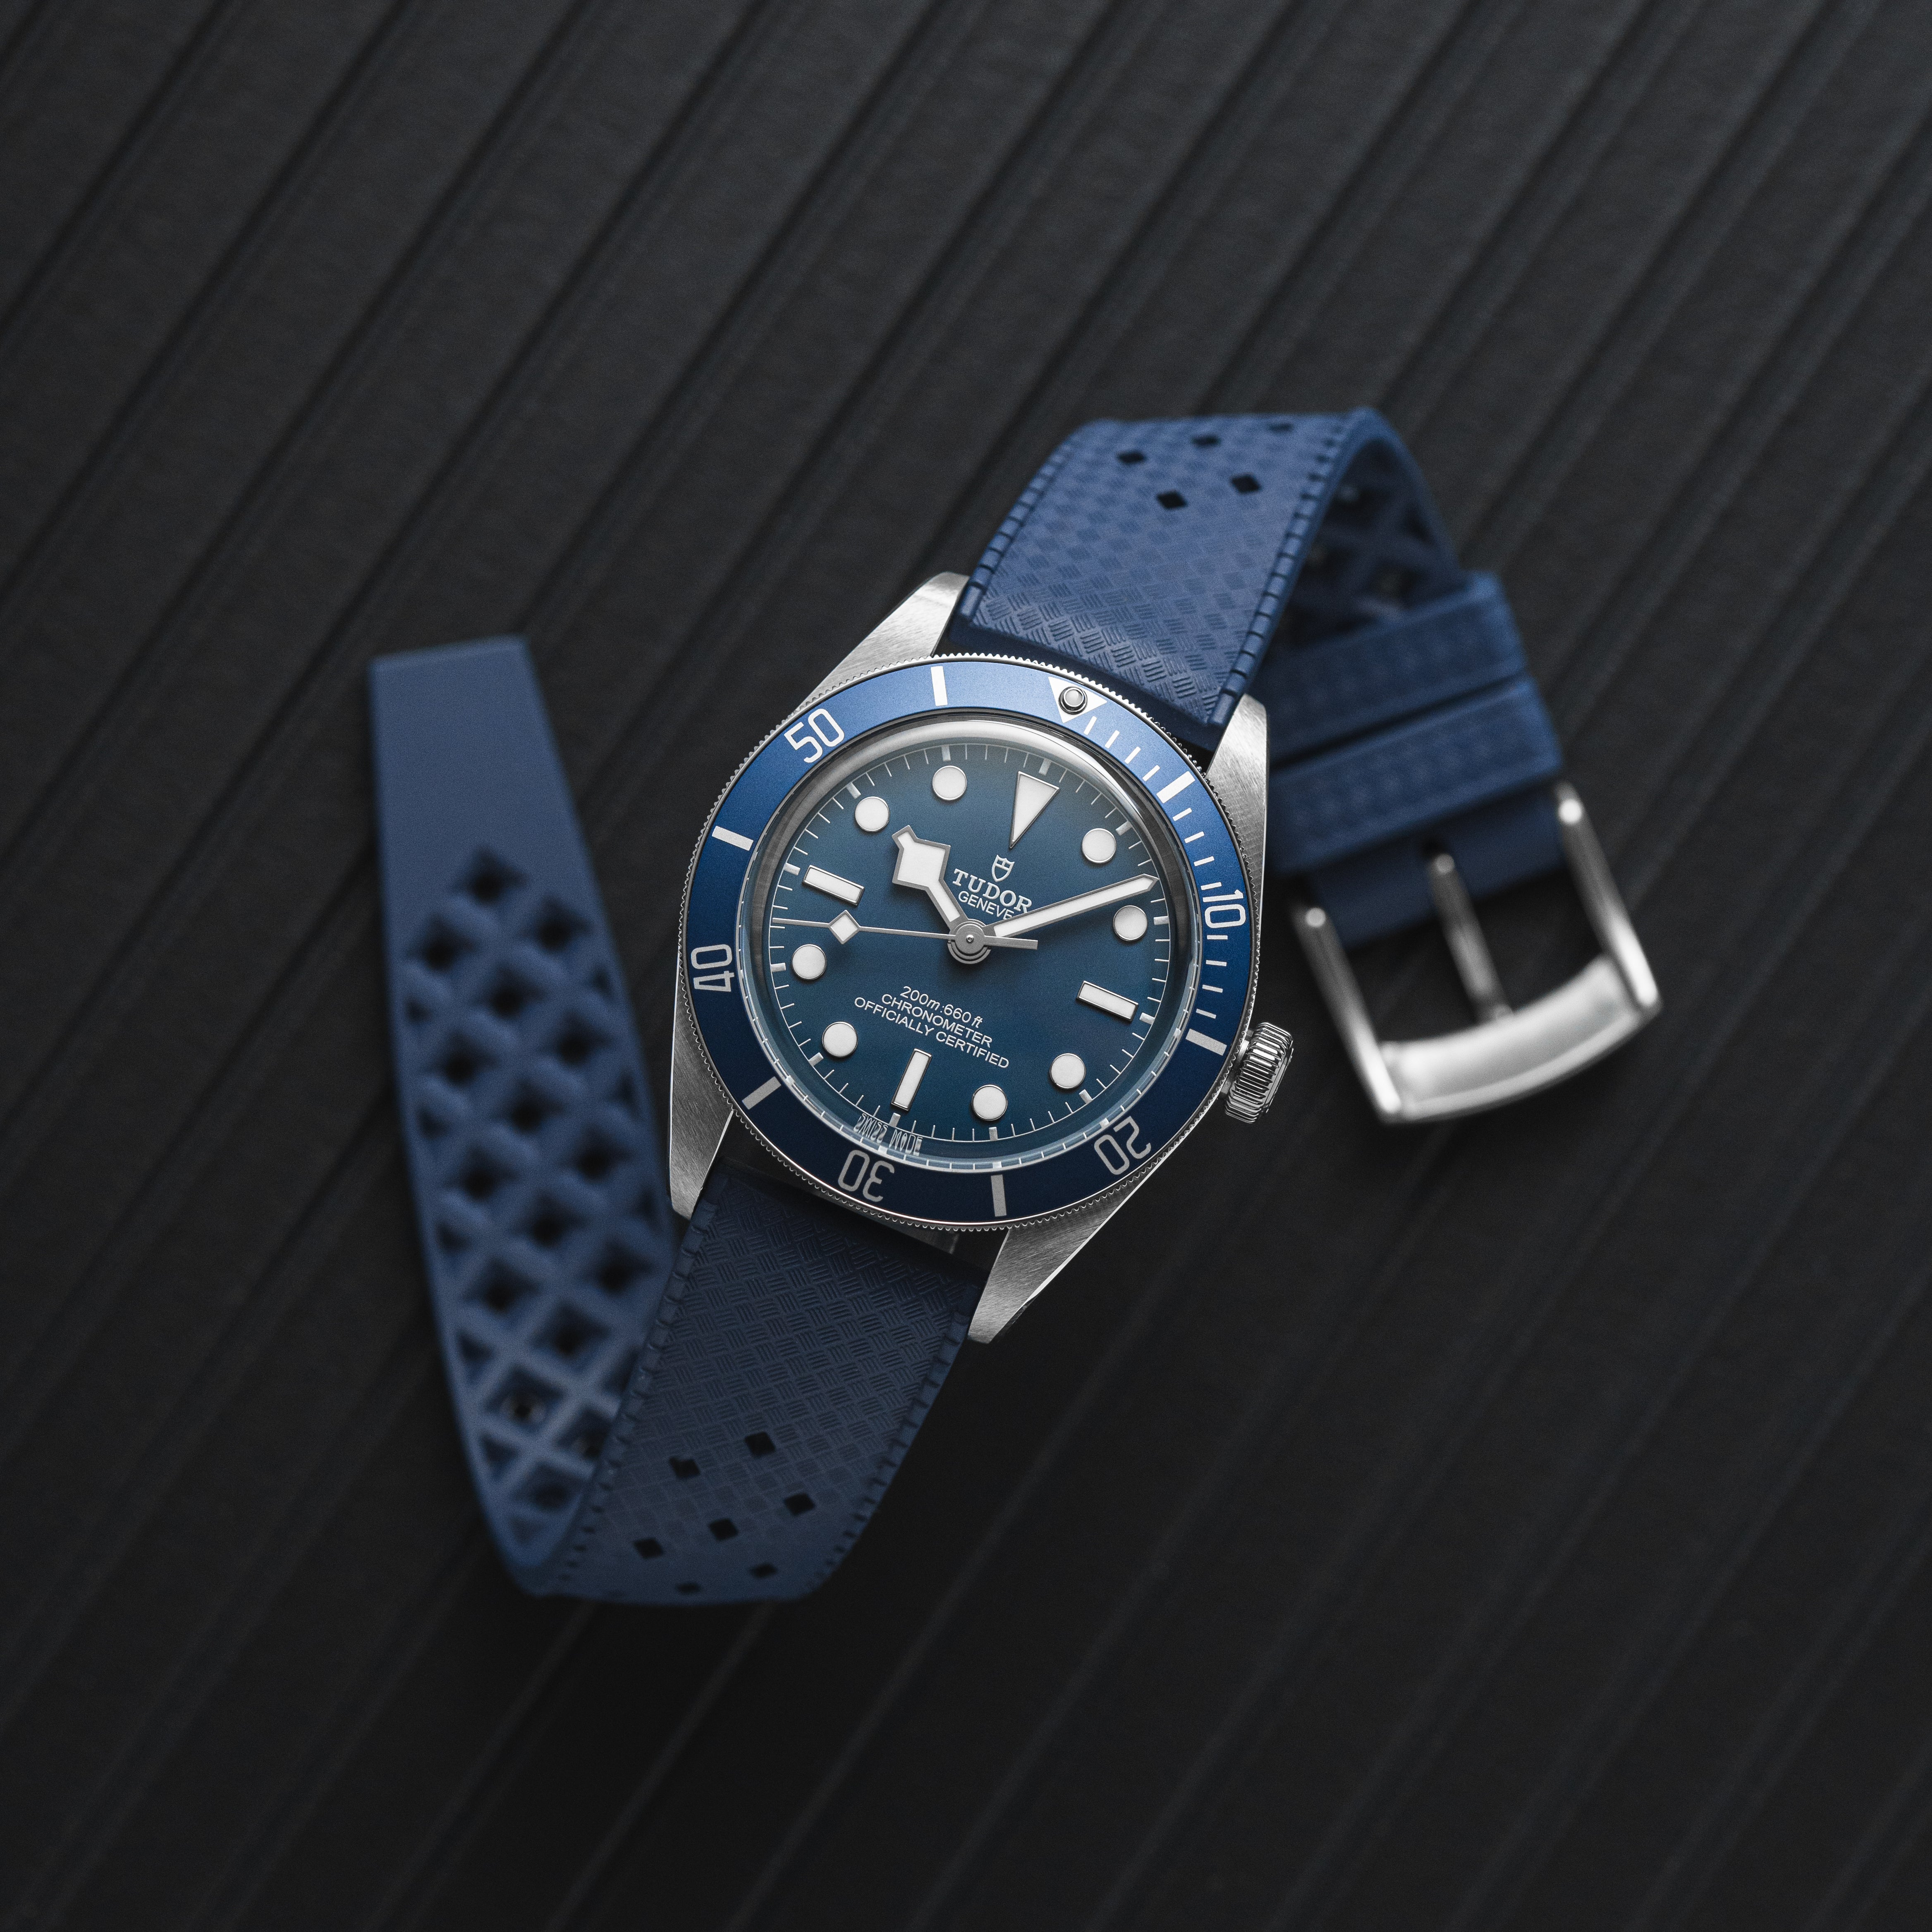 Calypso Tropical Style FKM Rubber Strap- Quick-Release-Compatible with Omega x Swatch - Navy (2422)